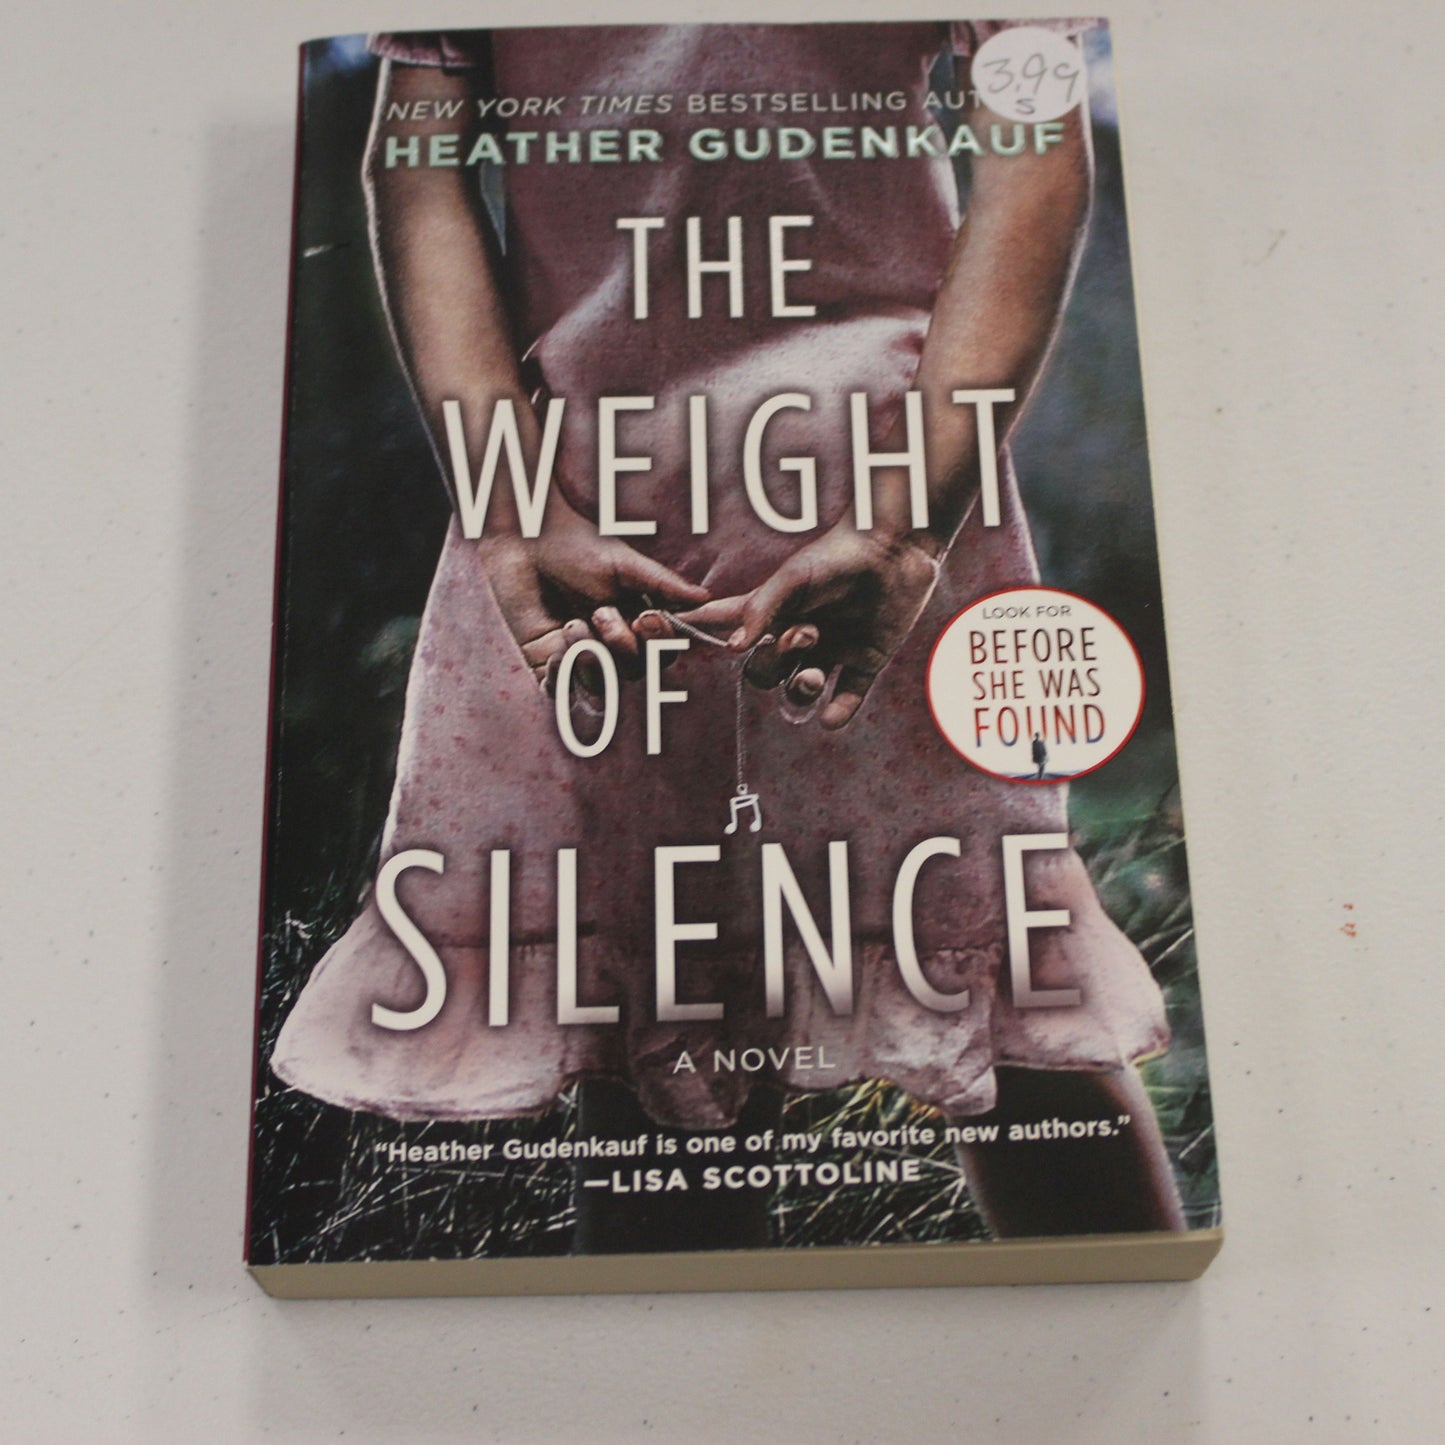 THE WEIGHT OF SILENCE